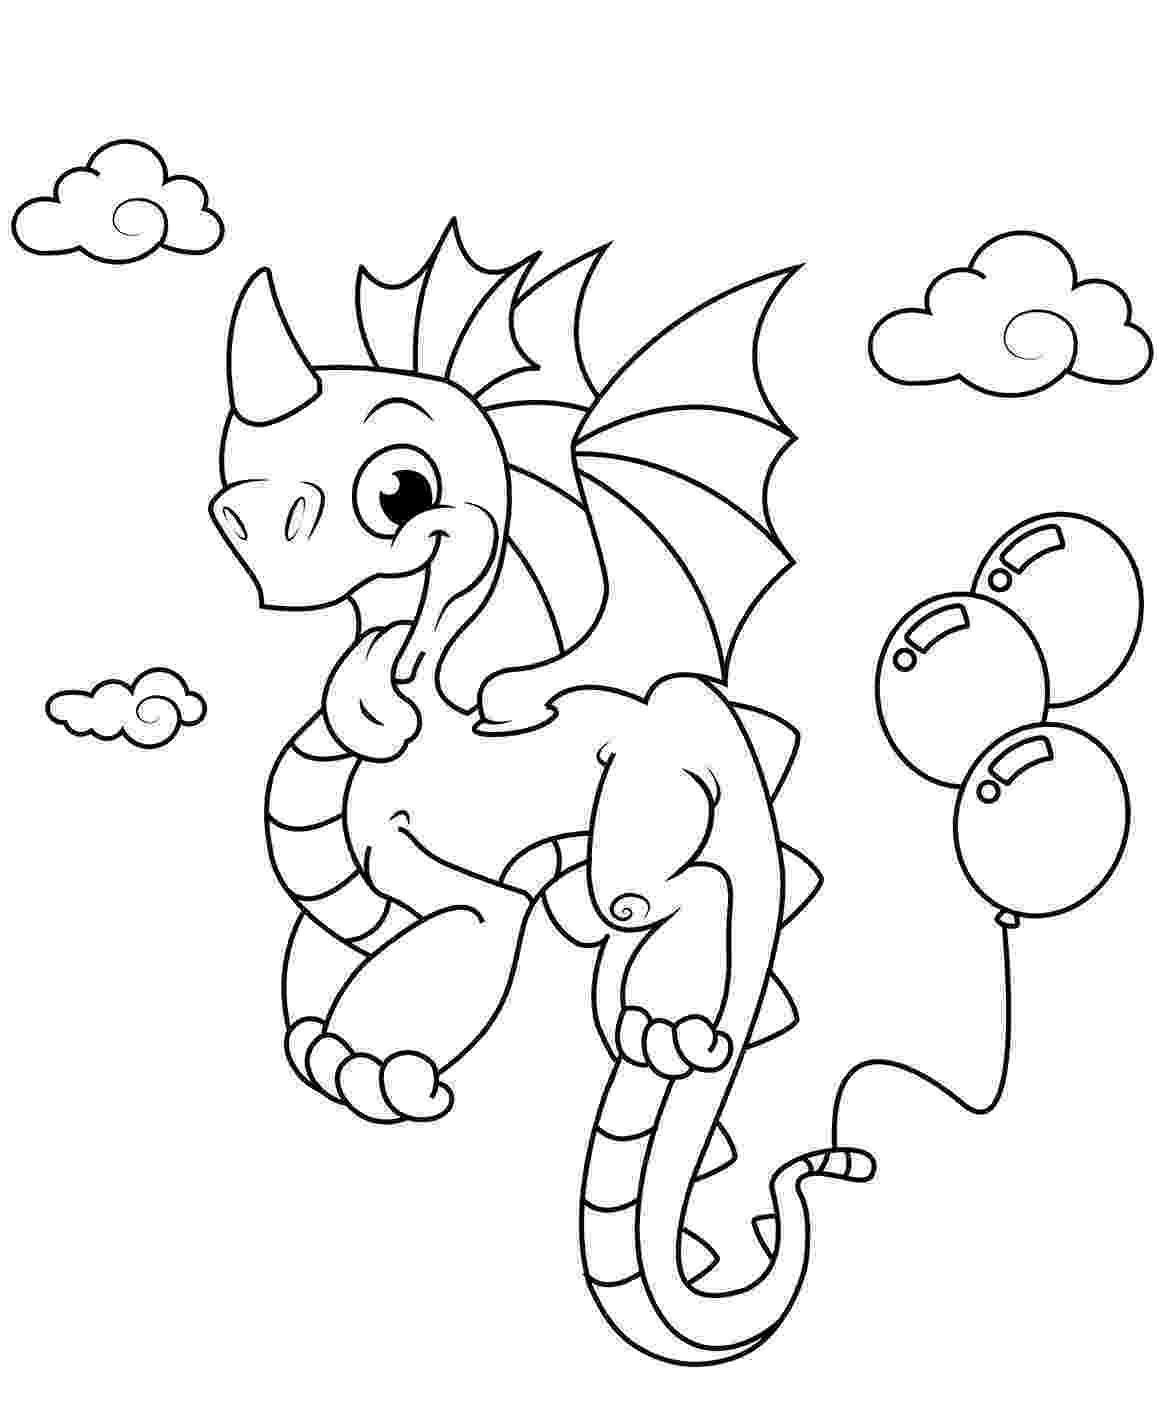 coloring dragon chinese dragon coloring pages to download and print for free dragon coloring 1 1